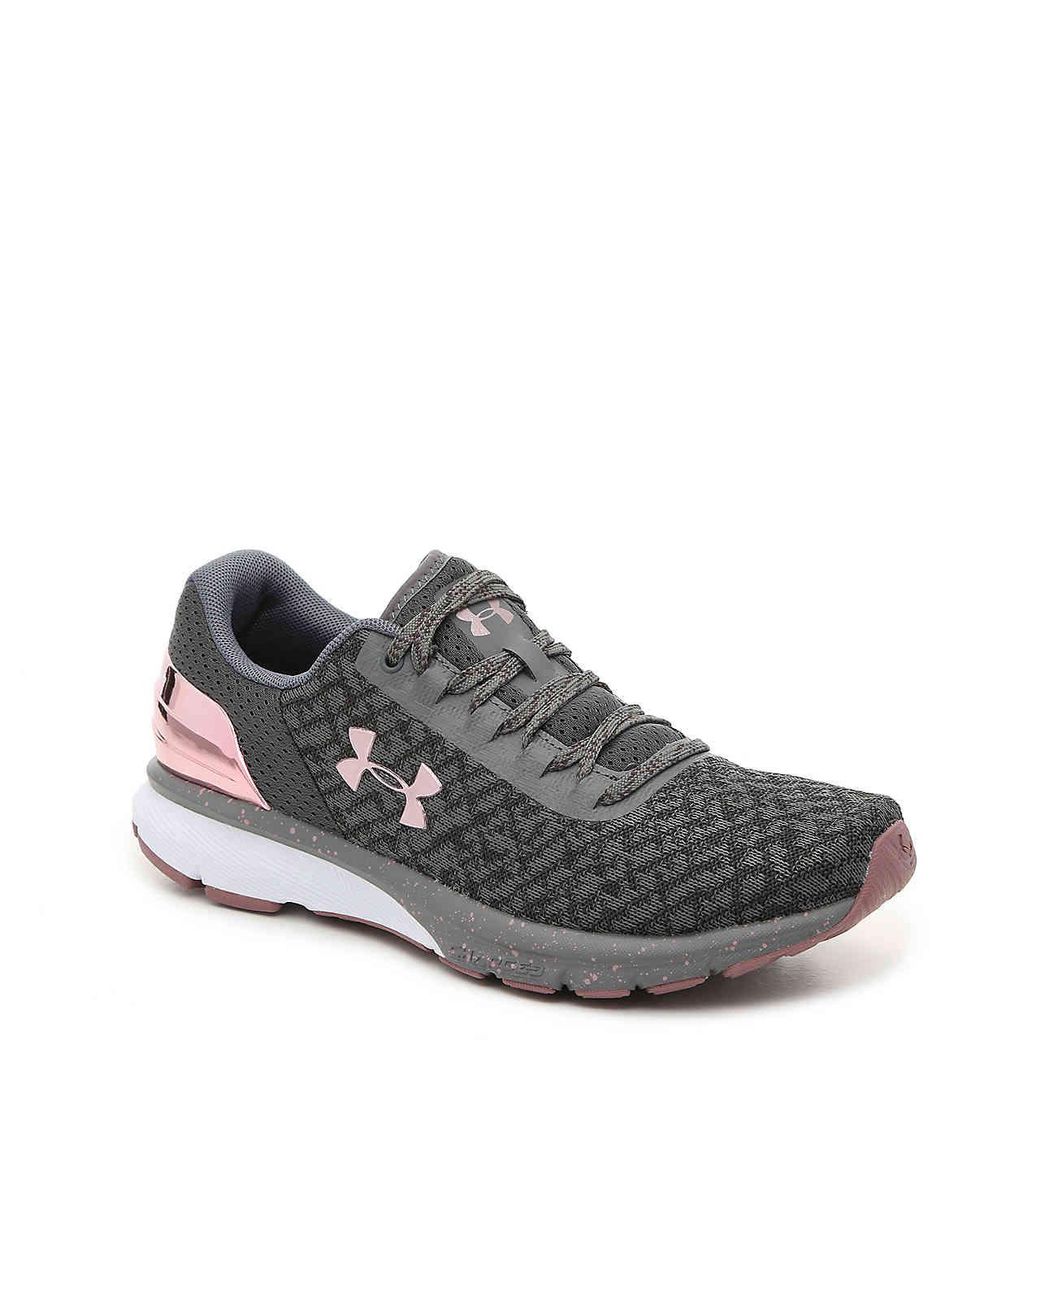 Under Armour Charged Escape 2 Running Shoe in Gray